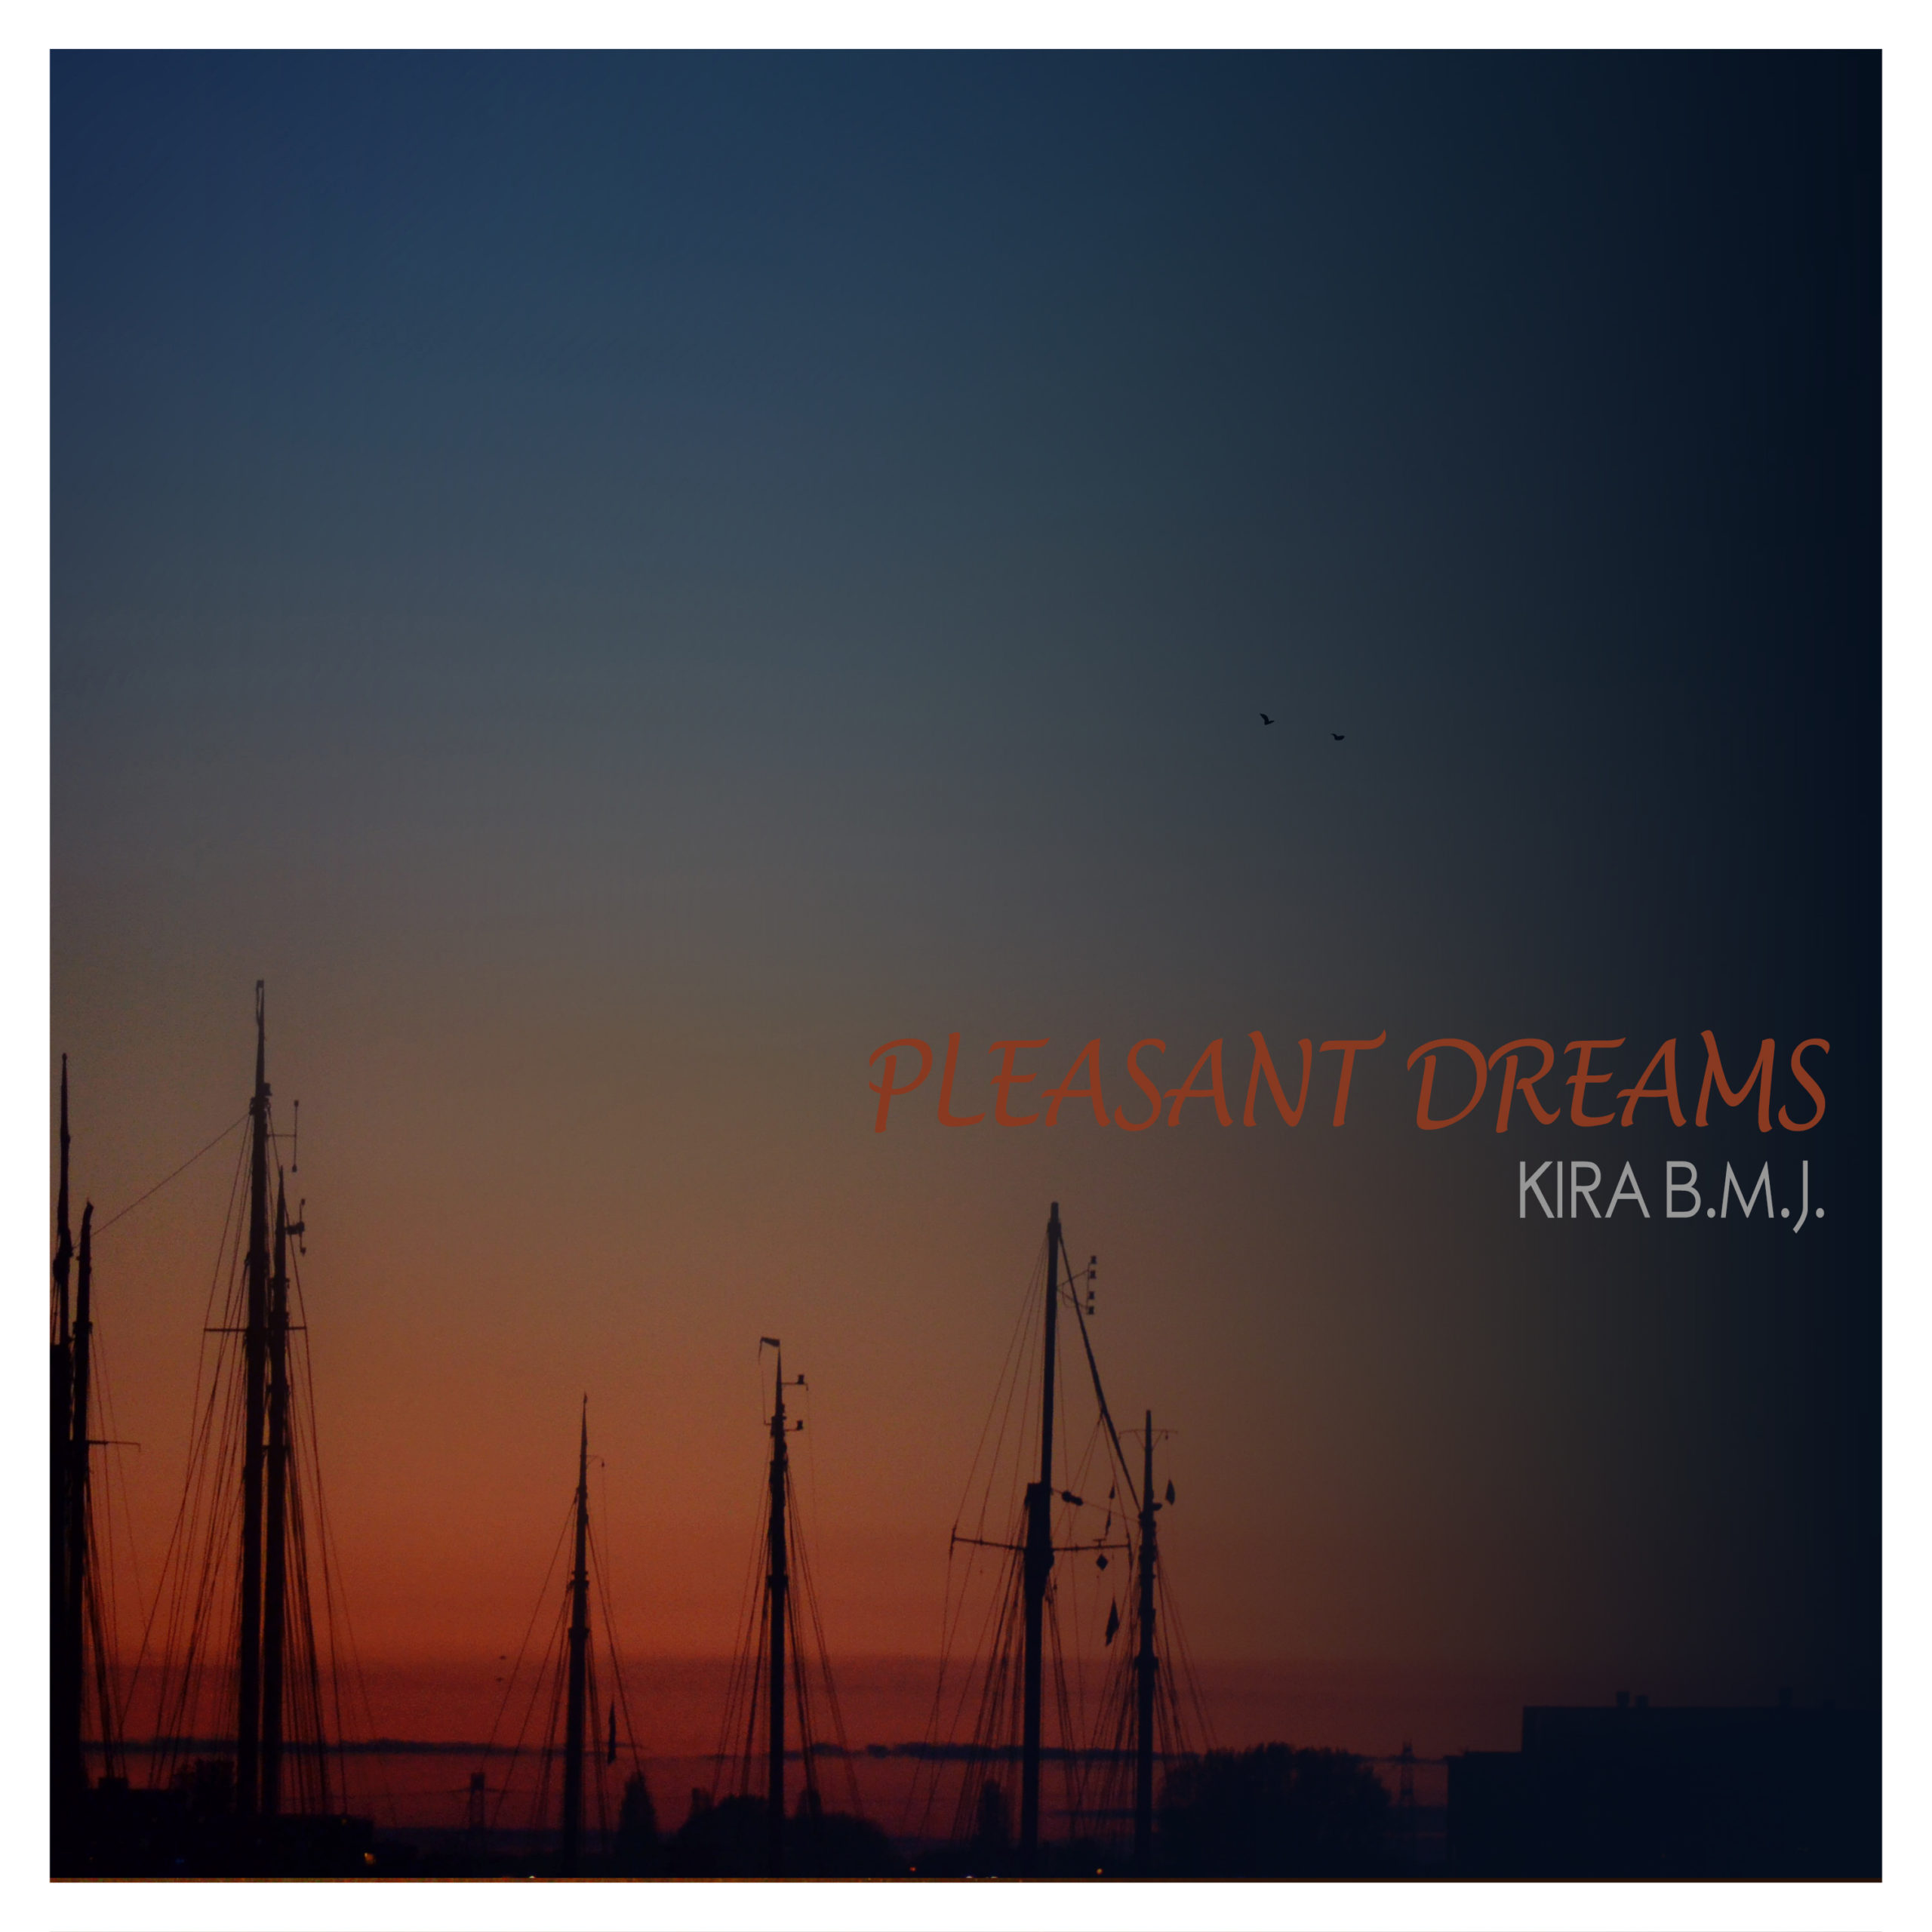 https://www.ultimate-house-records.com/wp-content/uploads/2022/06/FMTM002-Kira_BMJ-Pleasant_Dreams-Cover-3000px-scaled.jpg